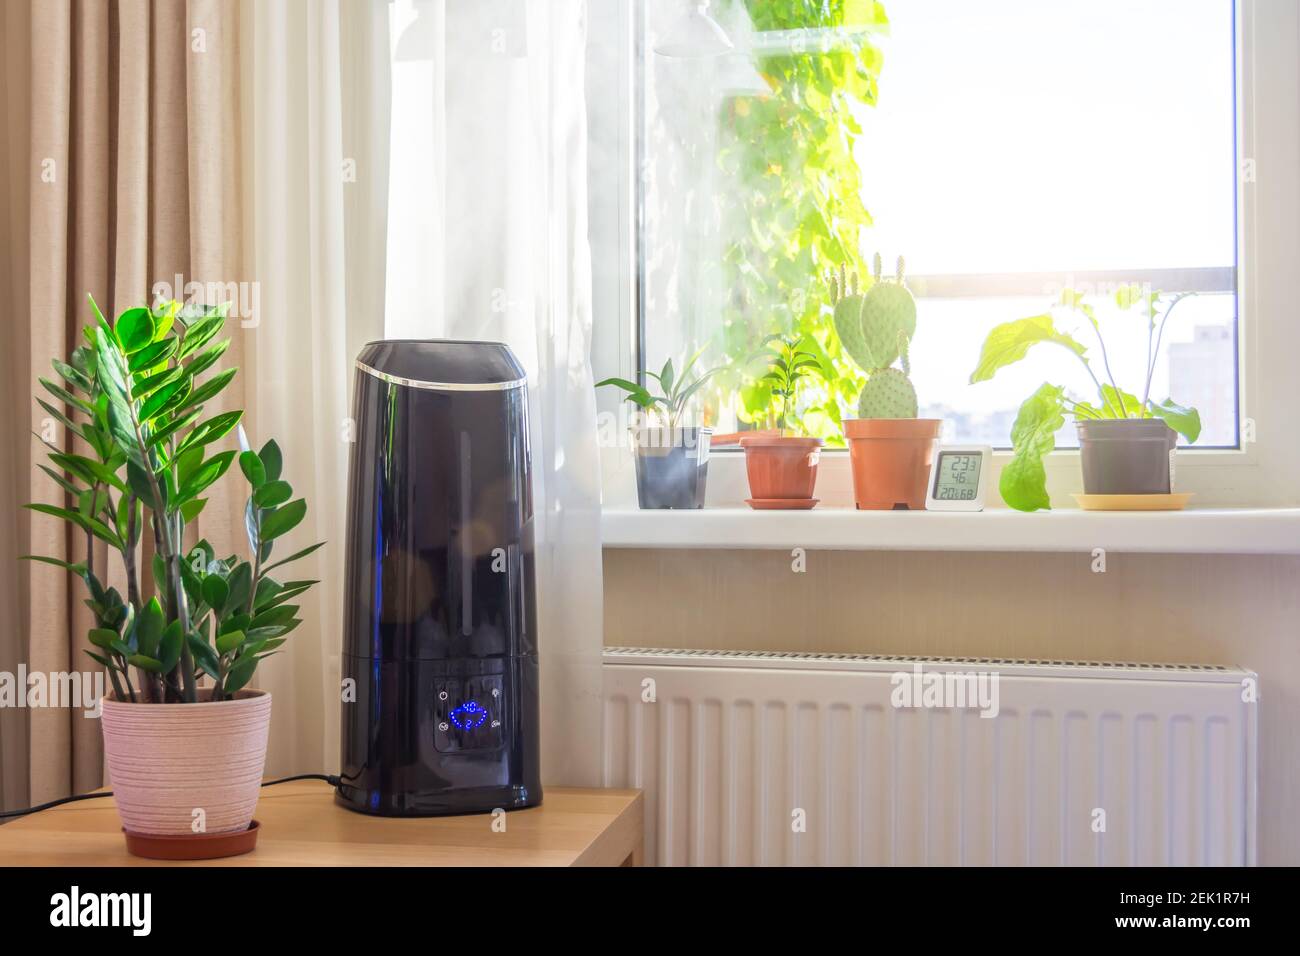 https://c8.alamy.com/comp/2EK1R7H/indoor-ornamental-and-deciduous-plants-on-the-windowsill-and-table-in-the-apartment-with-a-steam-humidifier-and-thermometer-to-measure-air-temperature-2EK1R7H.jpg